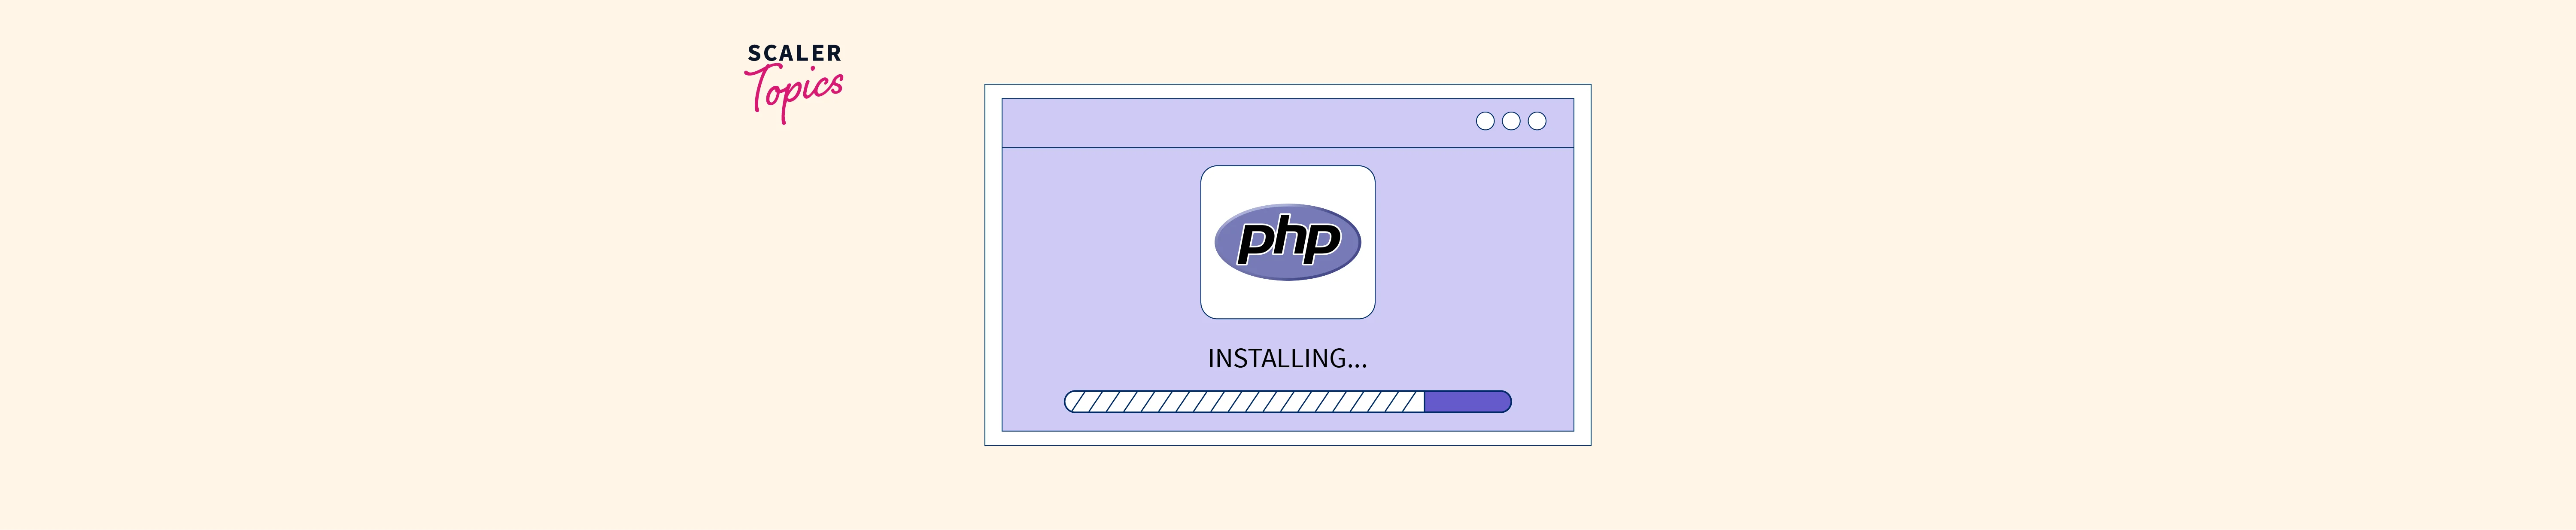 Install Php Scaler Topics